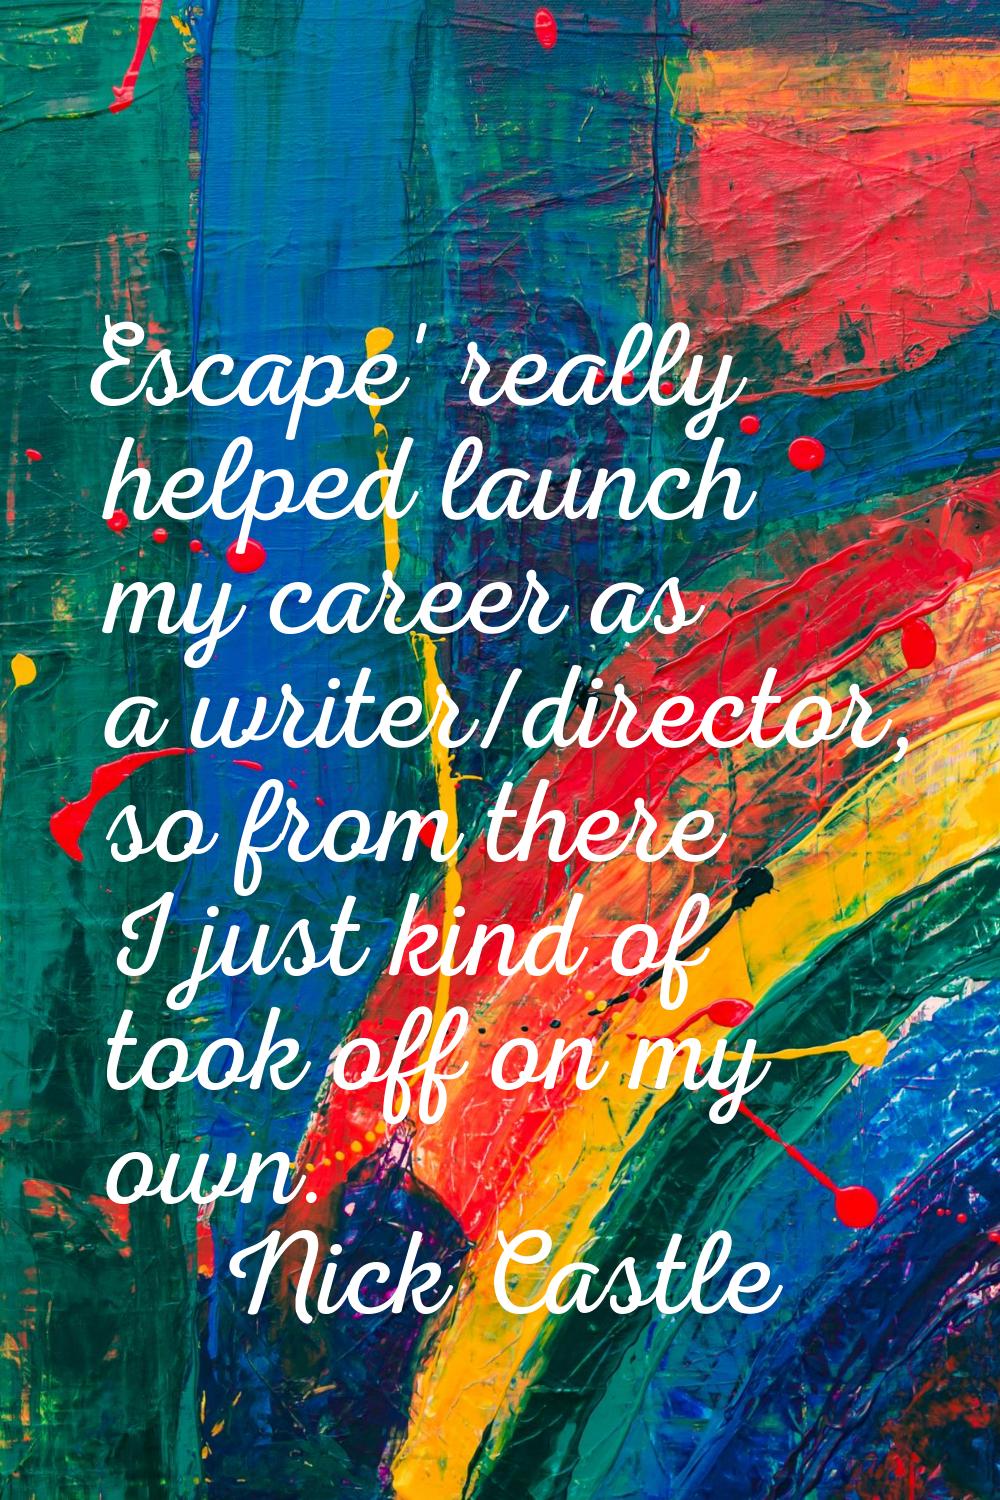 Escape' really helped launch my career as a writer/director, so from there I just kind of took off 